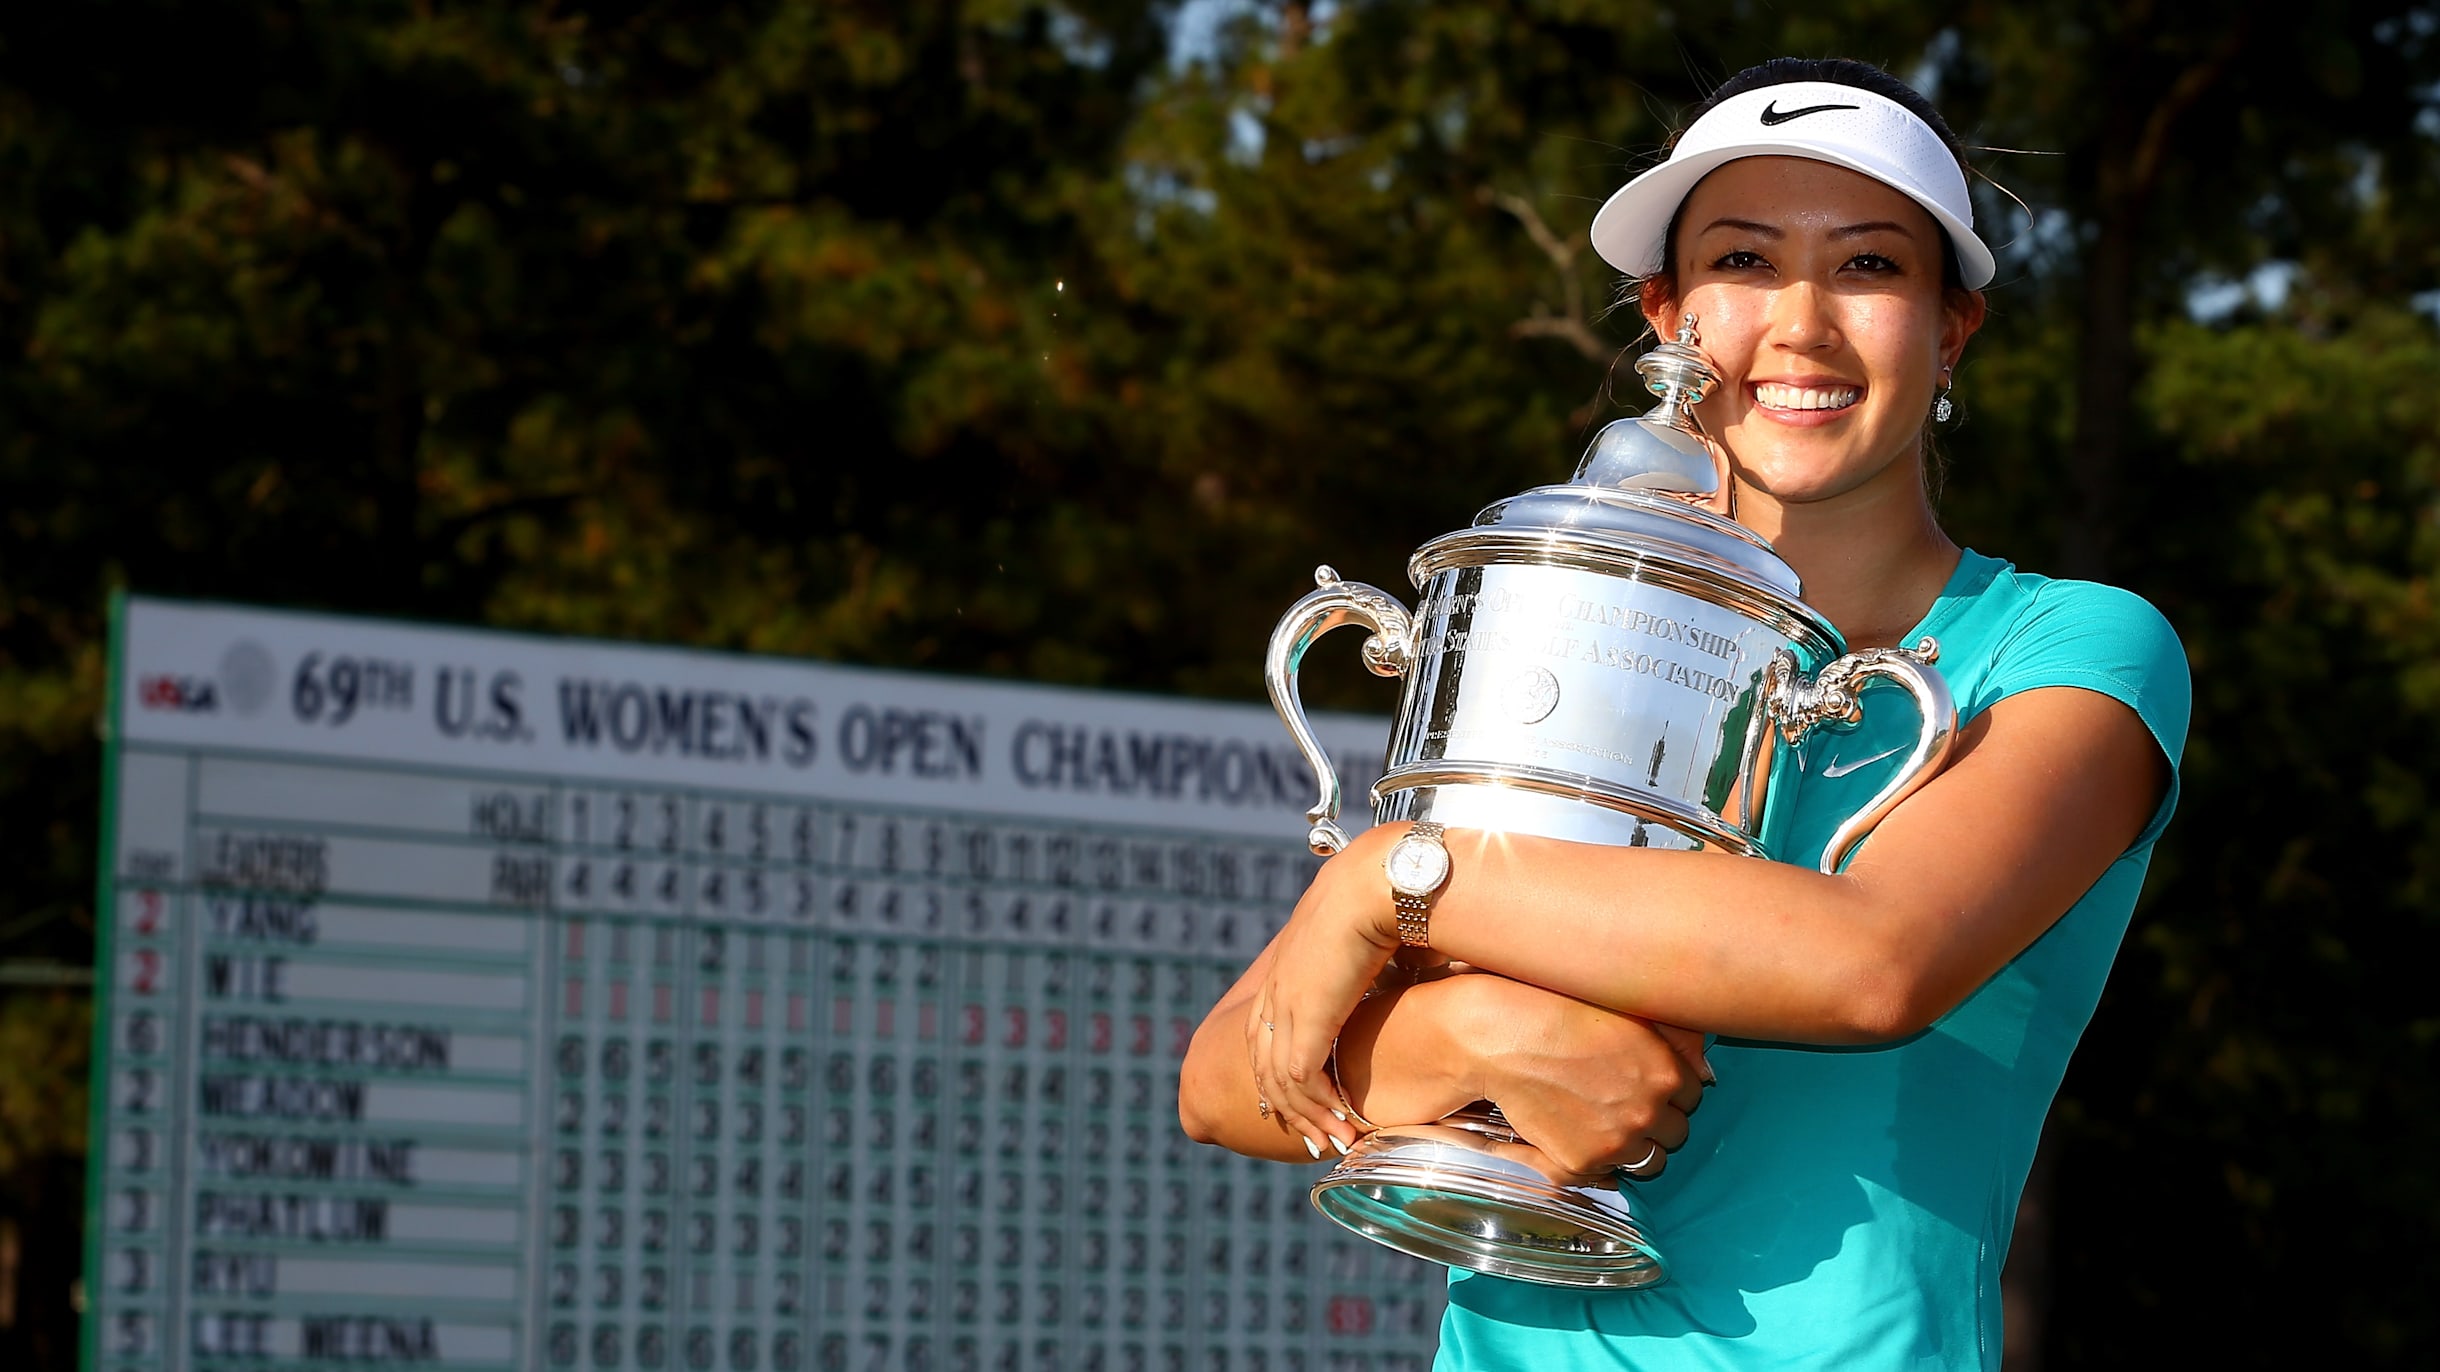 Michelle Wie West All titles, career records, golf awards, and life milestones